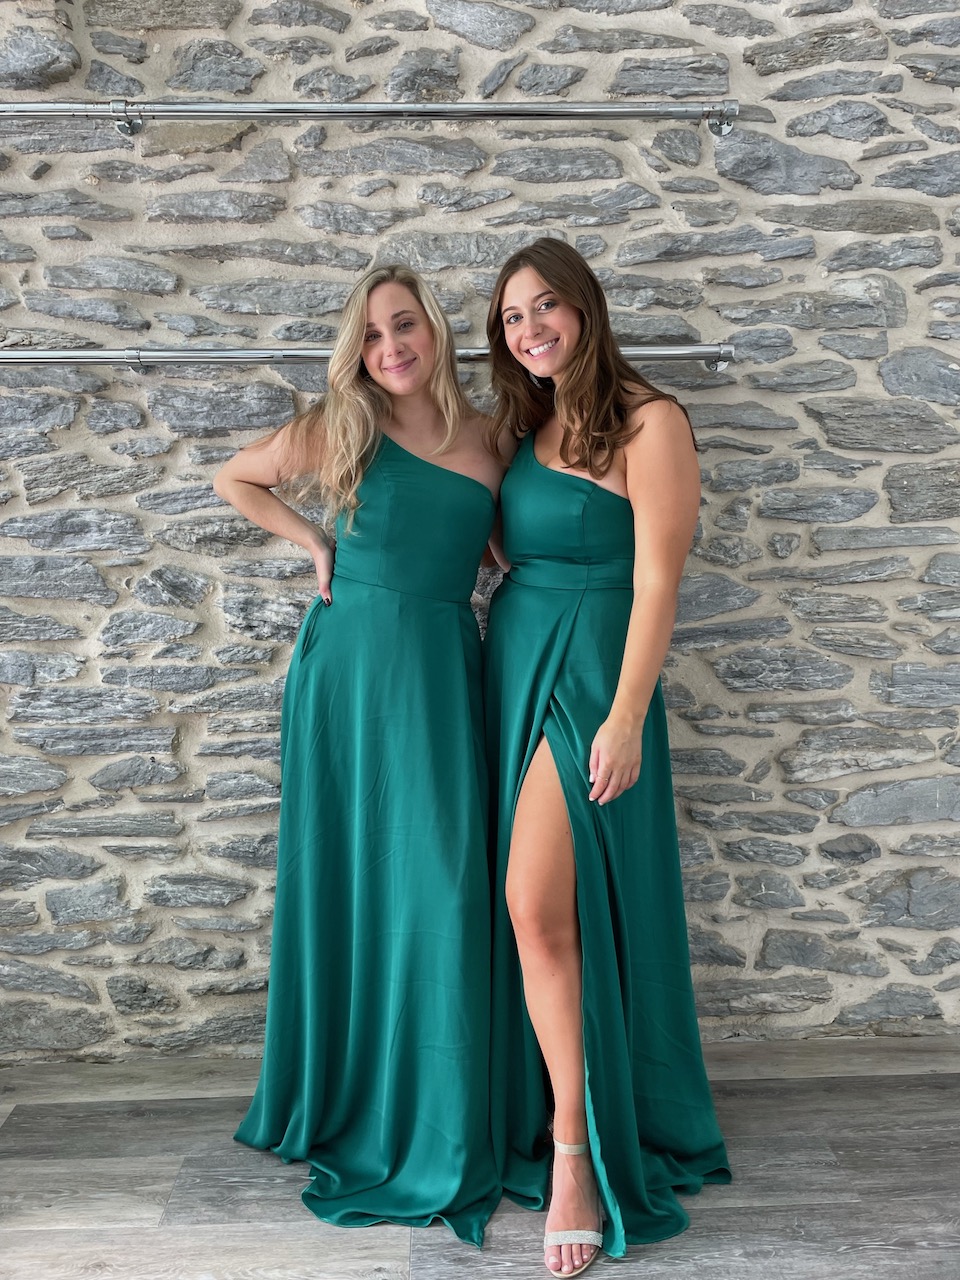 The Most Stunning Emerald Green Bridesmaid Dresses in Every Style